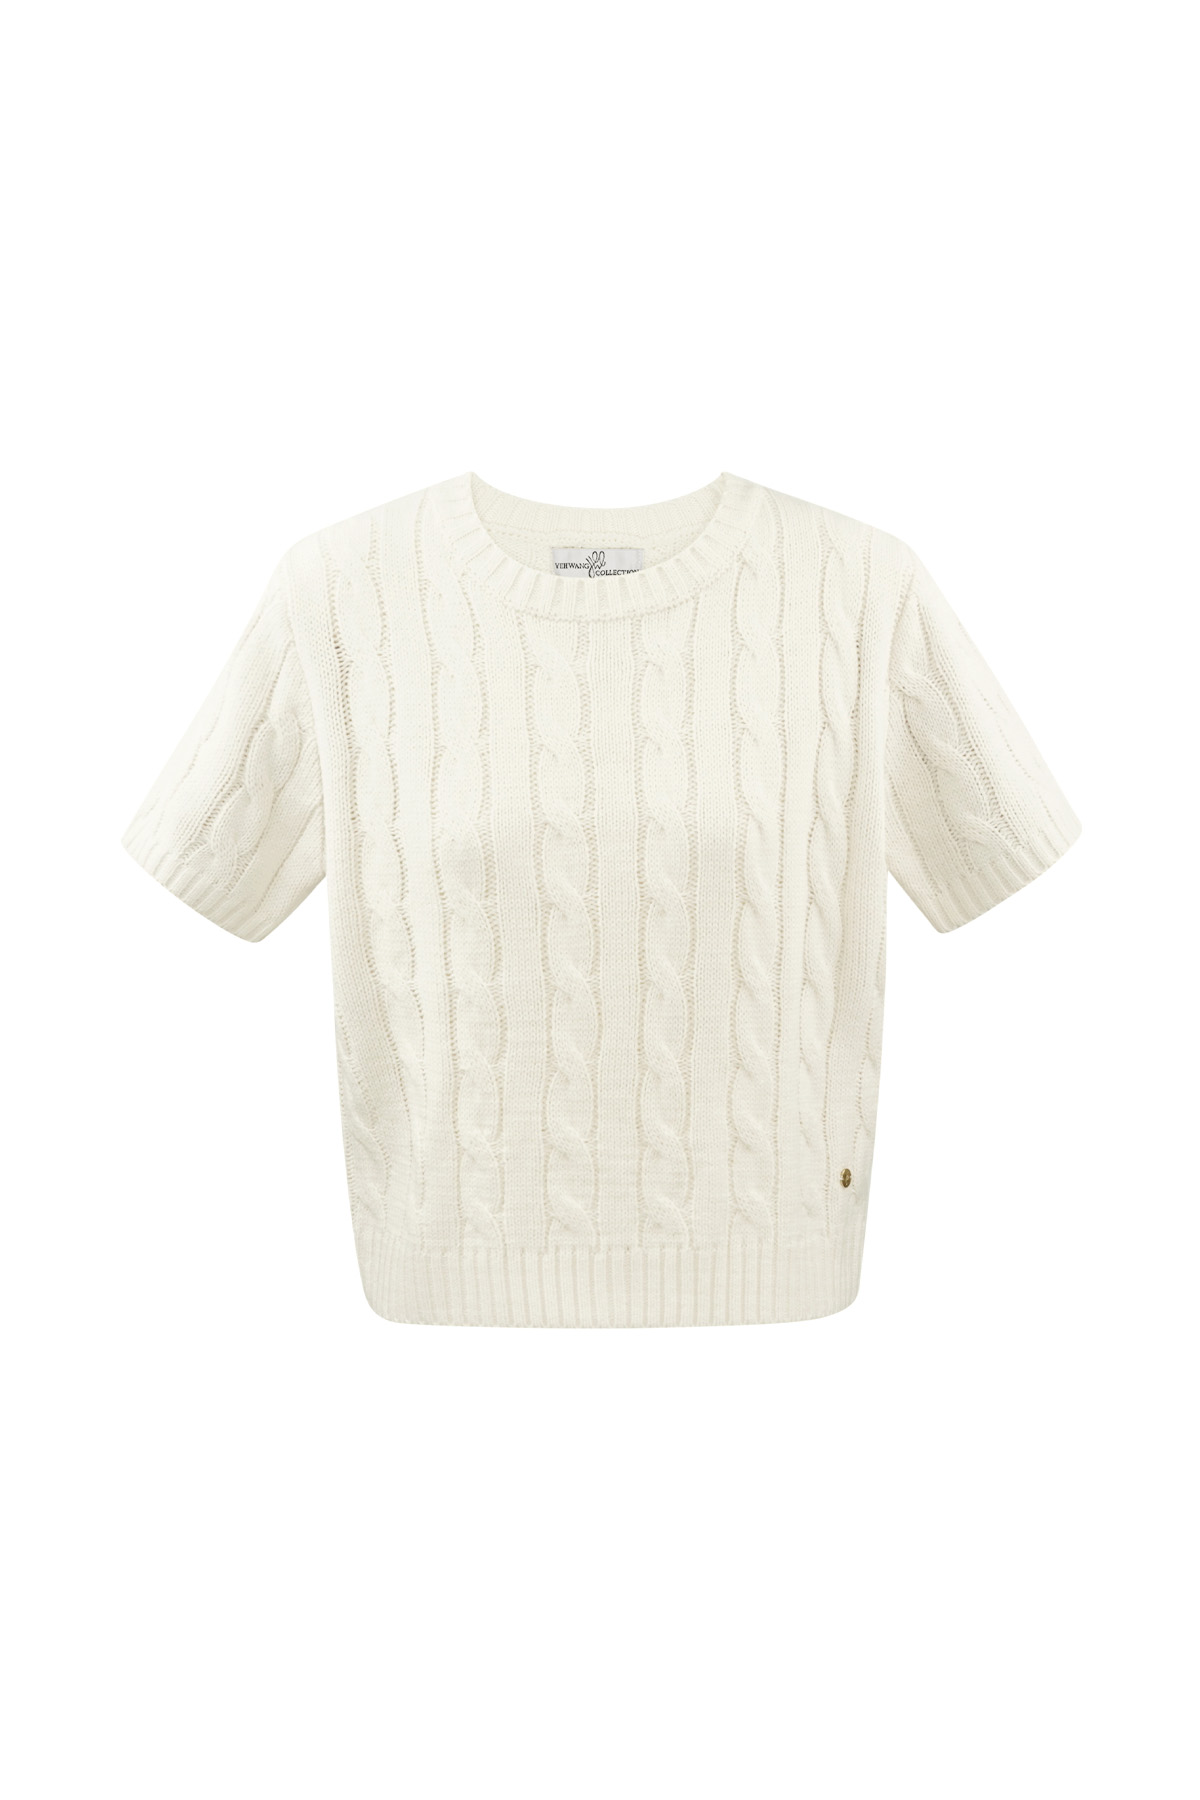 Classic knitted sweater with cables and short sleeves small/medium – off-white 